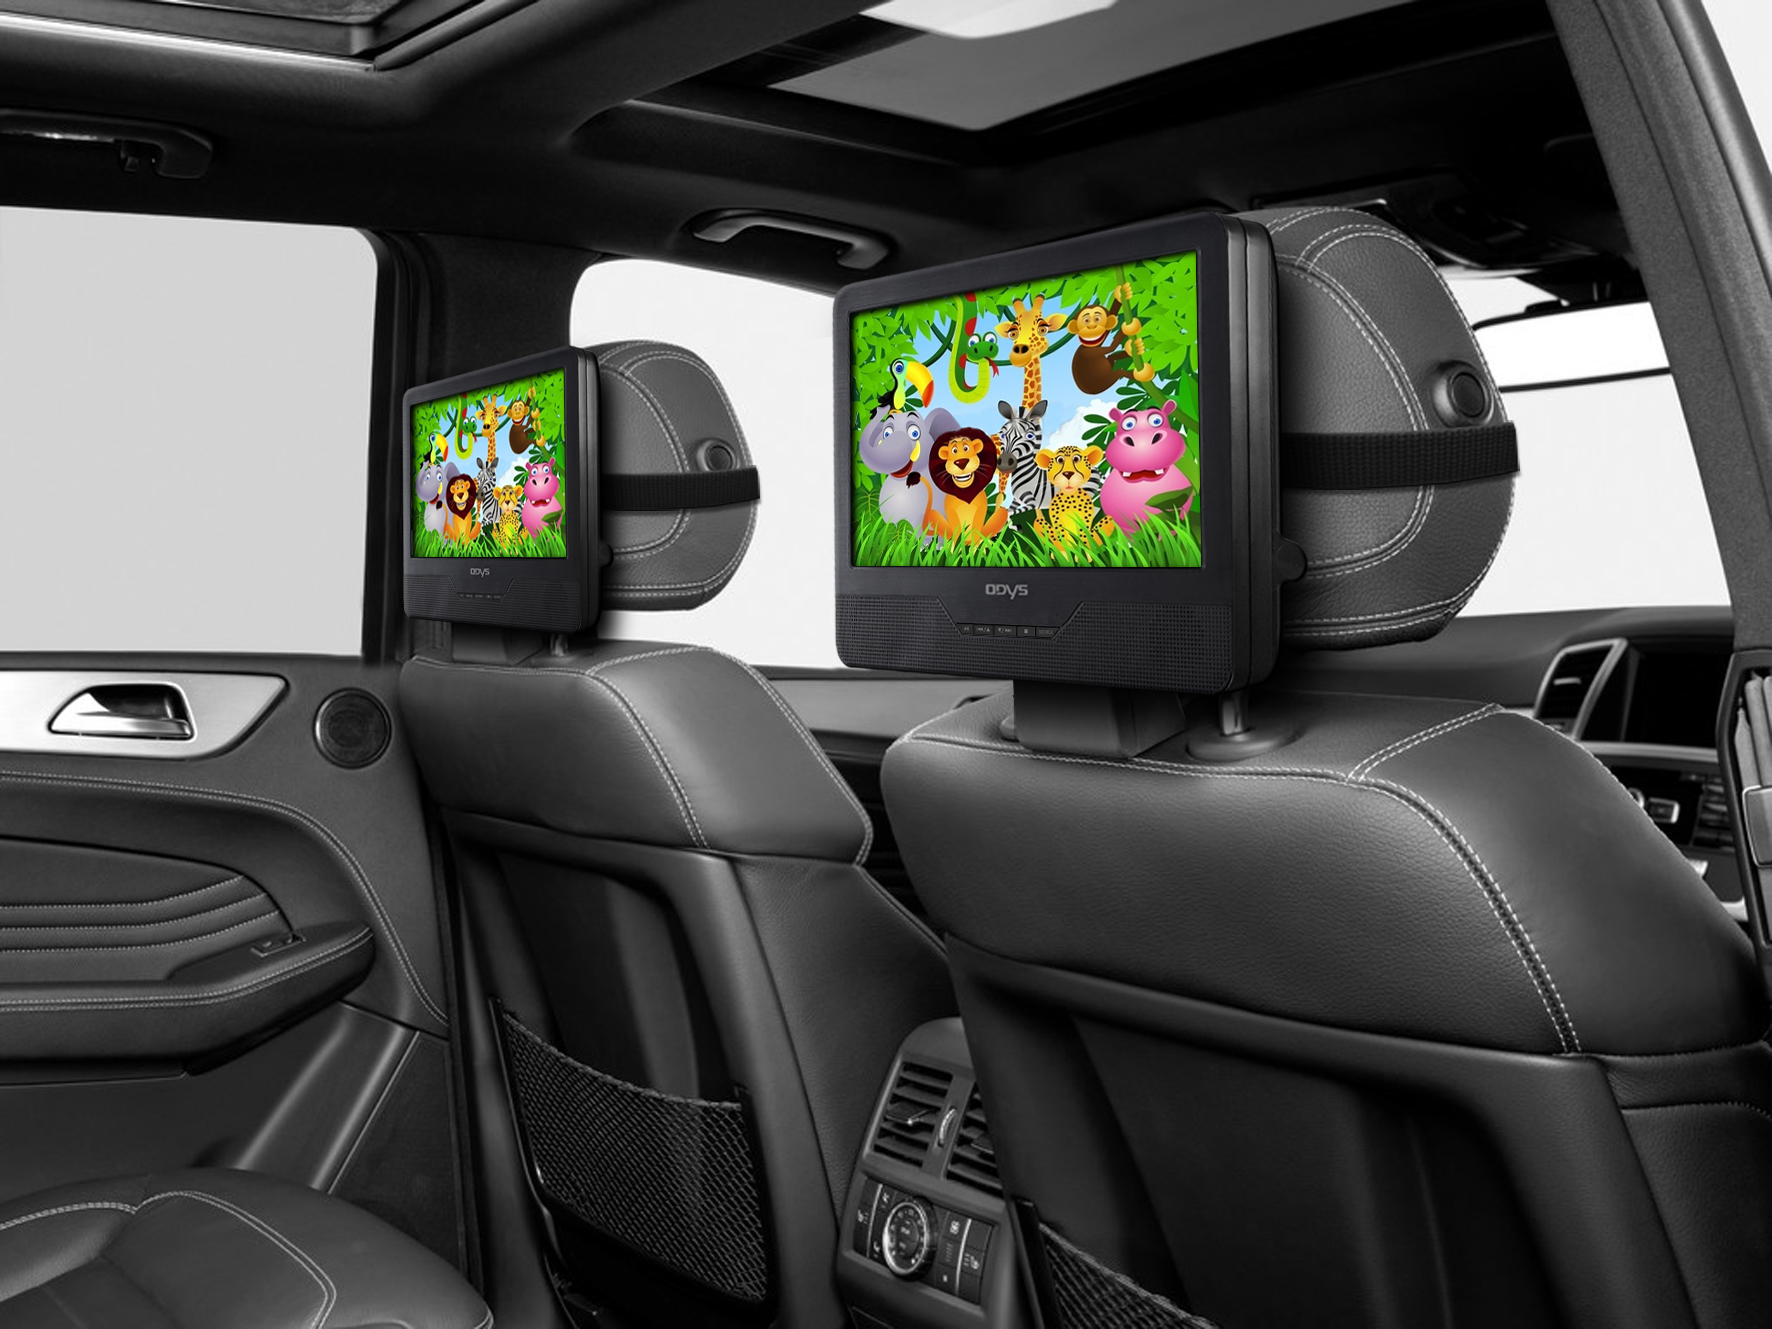 Odys Auto Monitore Entertainment System 2x9“ Schirm - kein iPad in